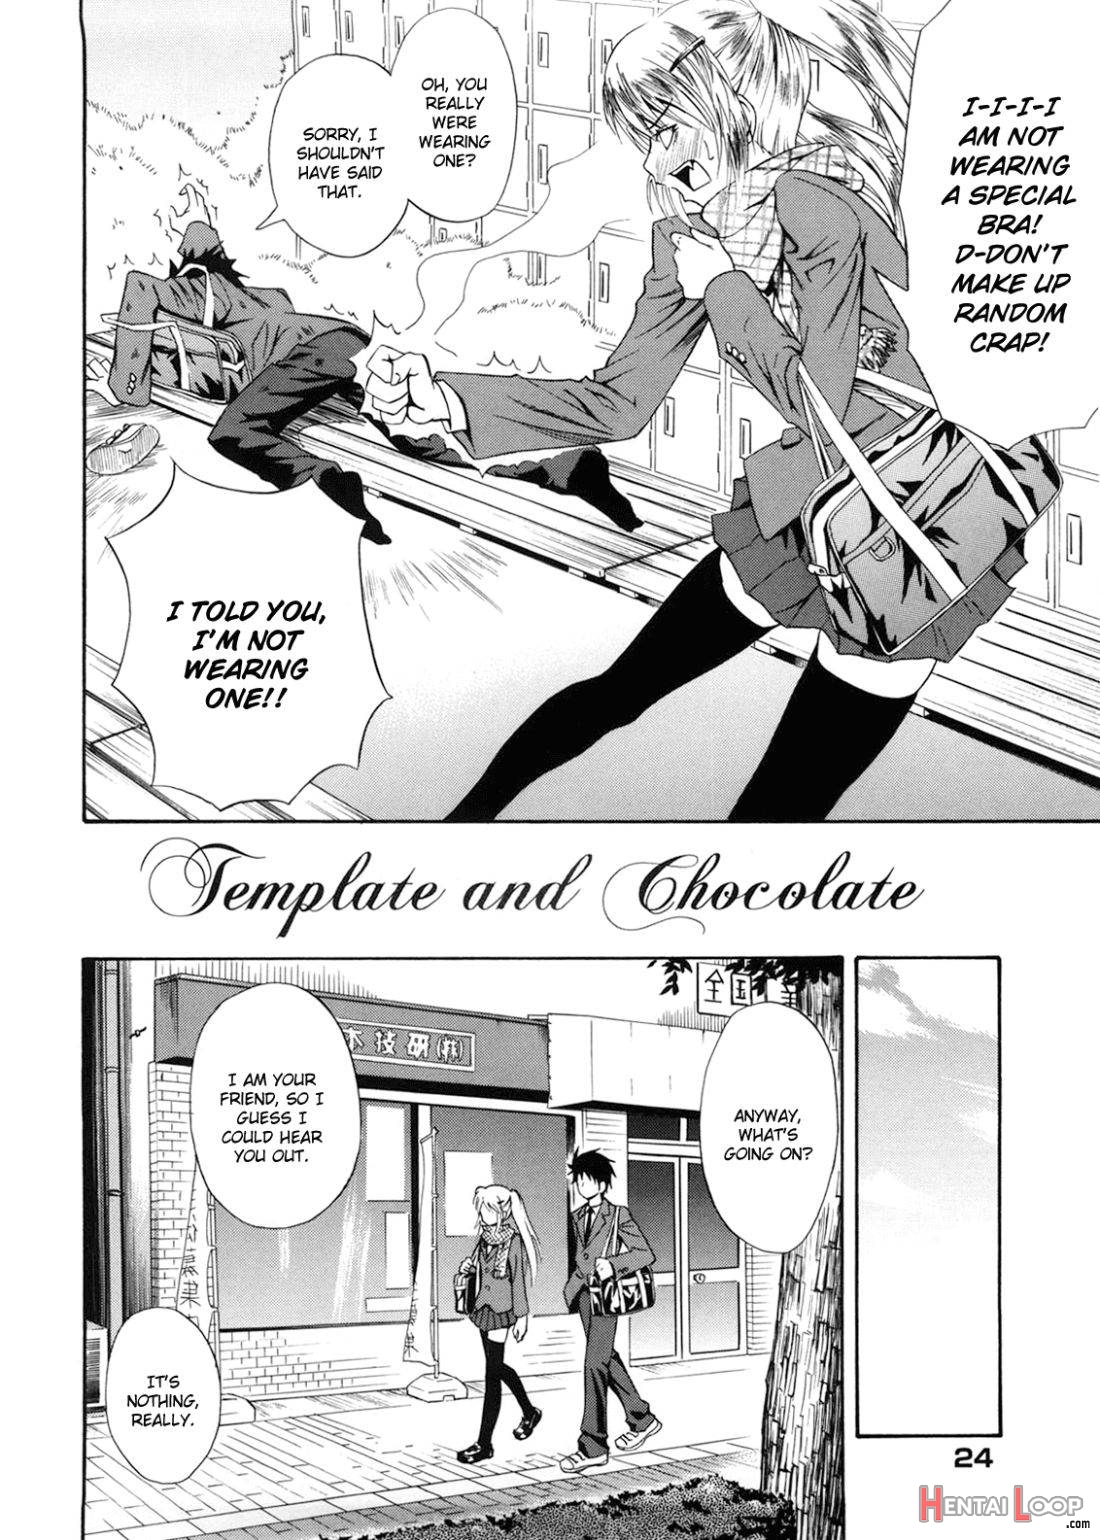 Template and Chocolate page 2